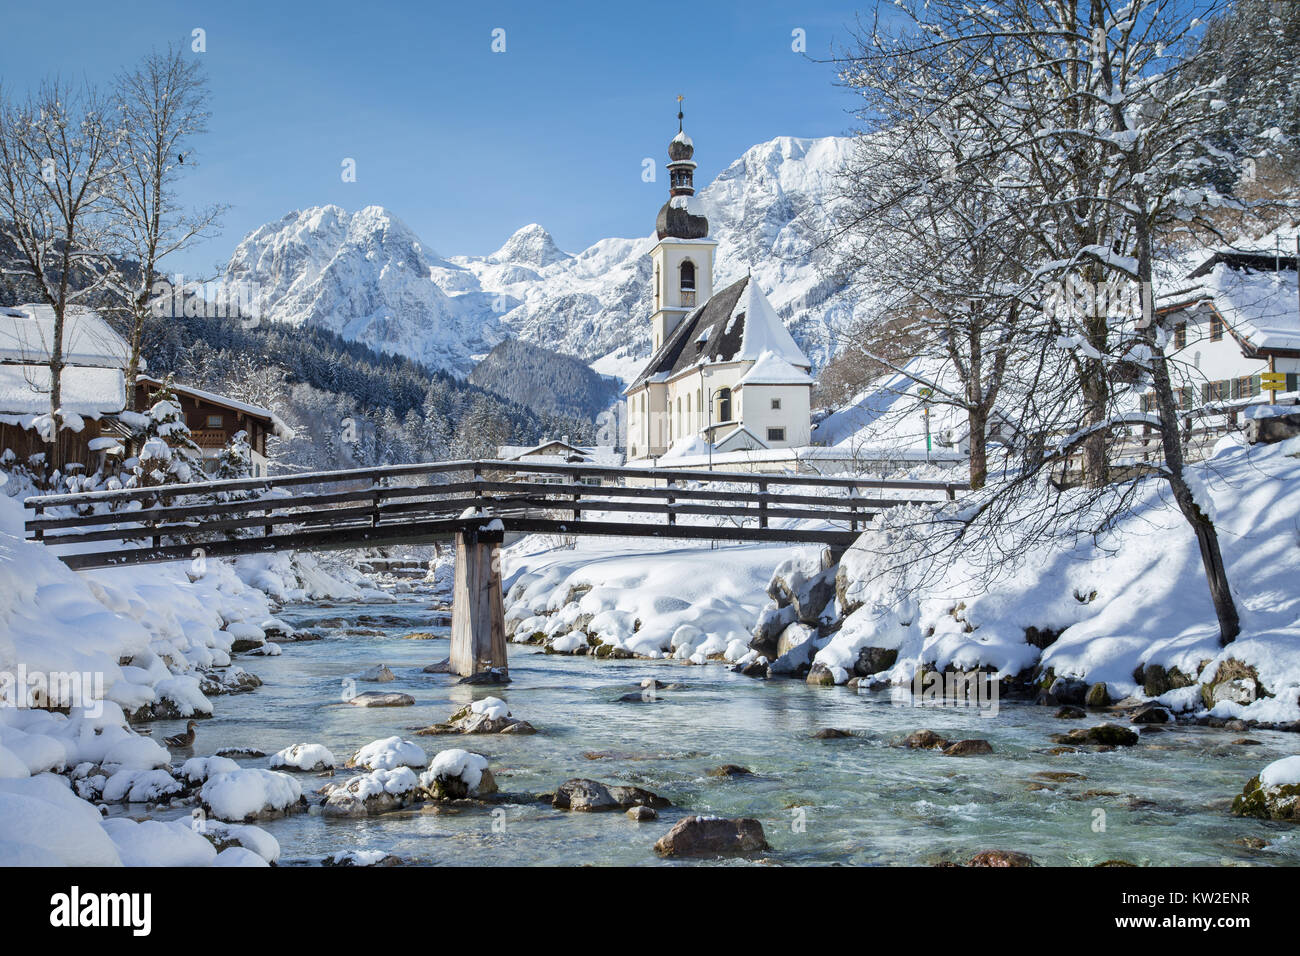 Panoramic view of scenic winter landscape in the Bavarian Alps with famous Parish Church of St. Sebastian in the village of Ramsau, Nationalpark Berch Stock Photo